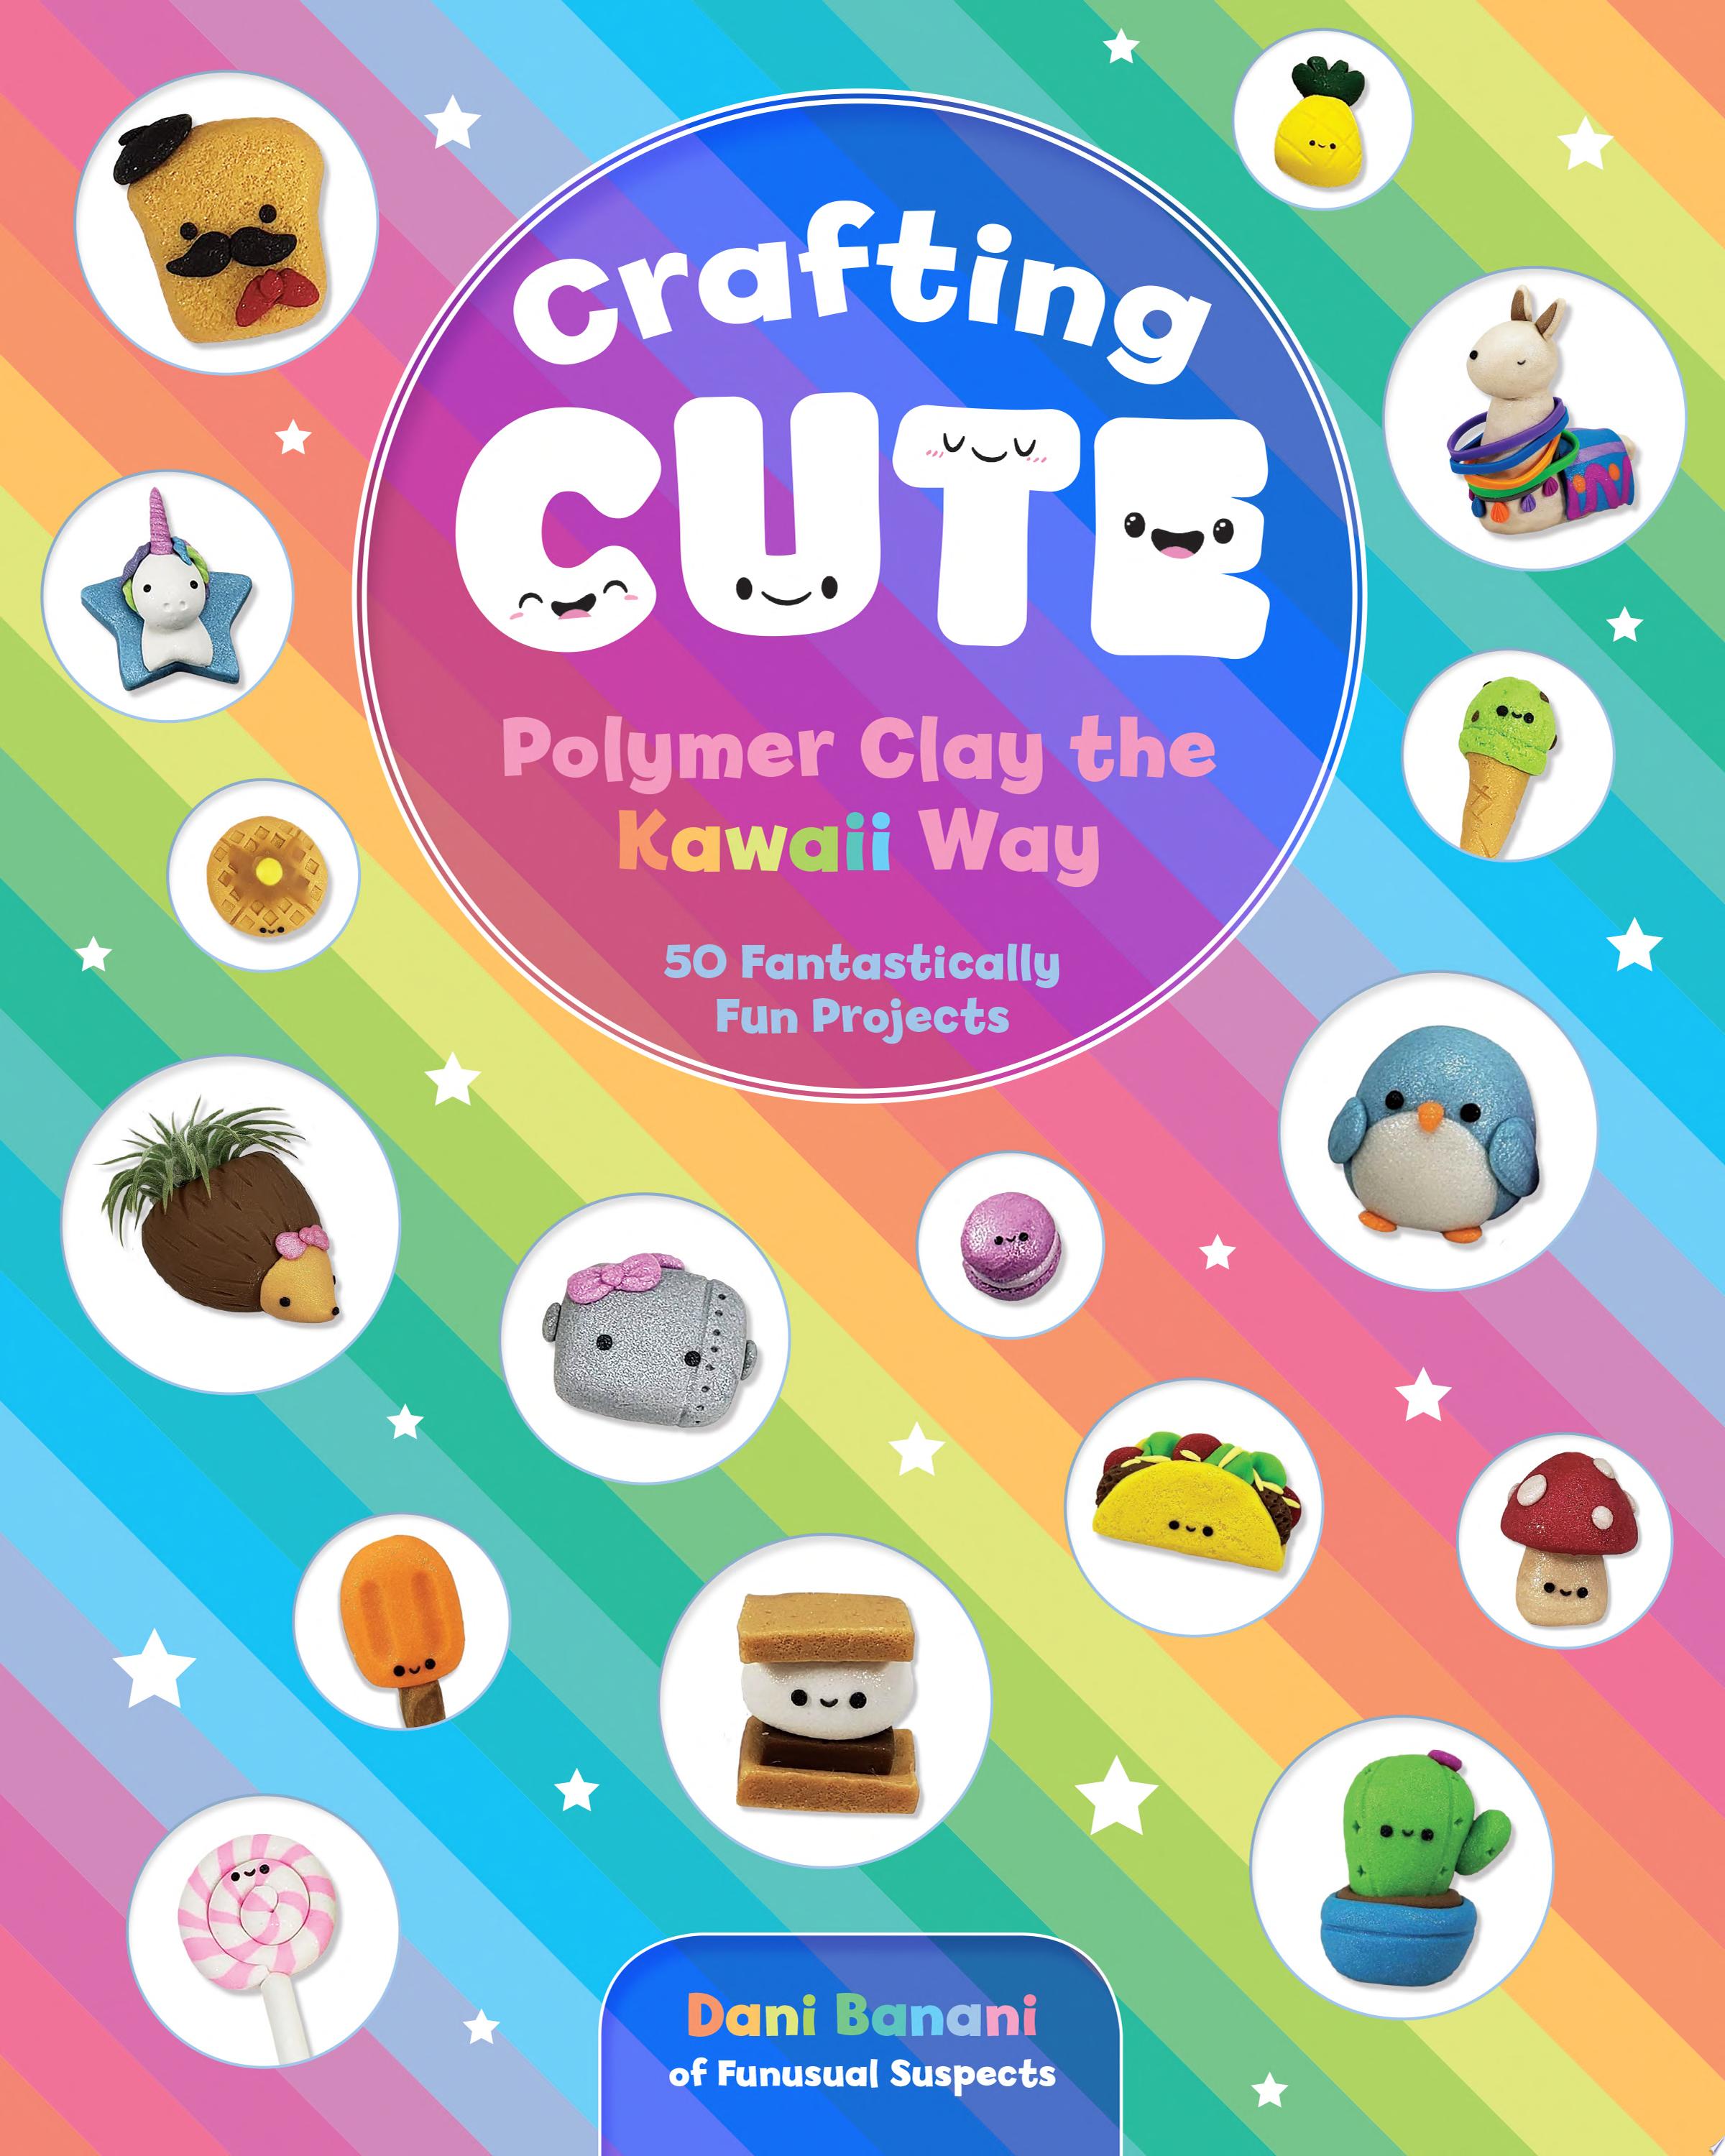 Image for "Crafting Cute"